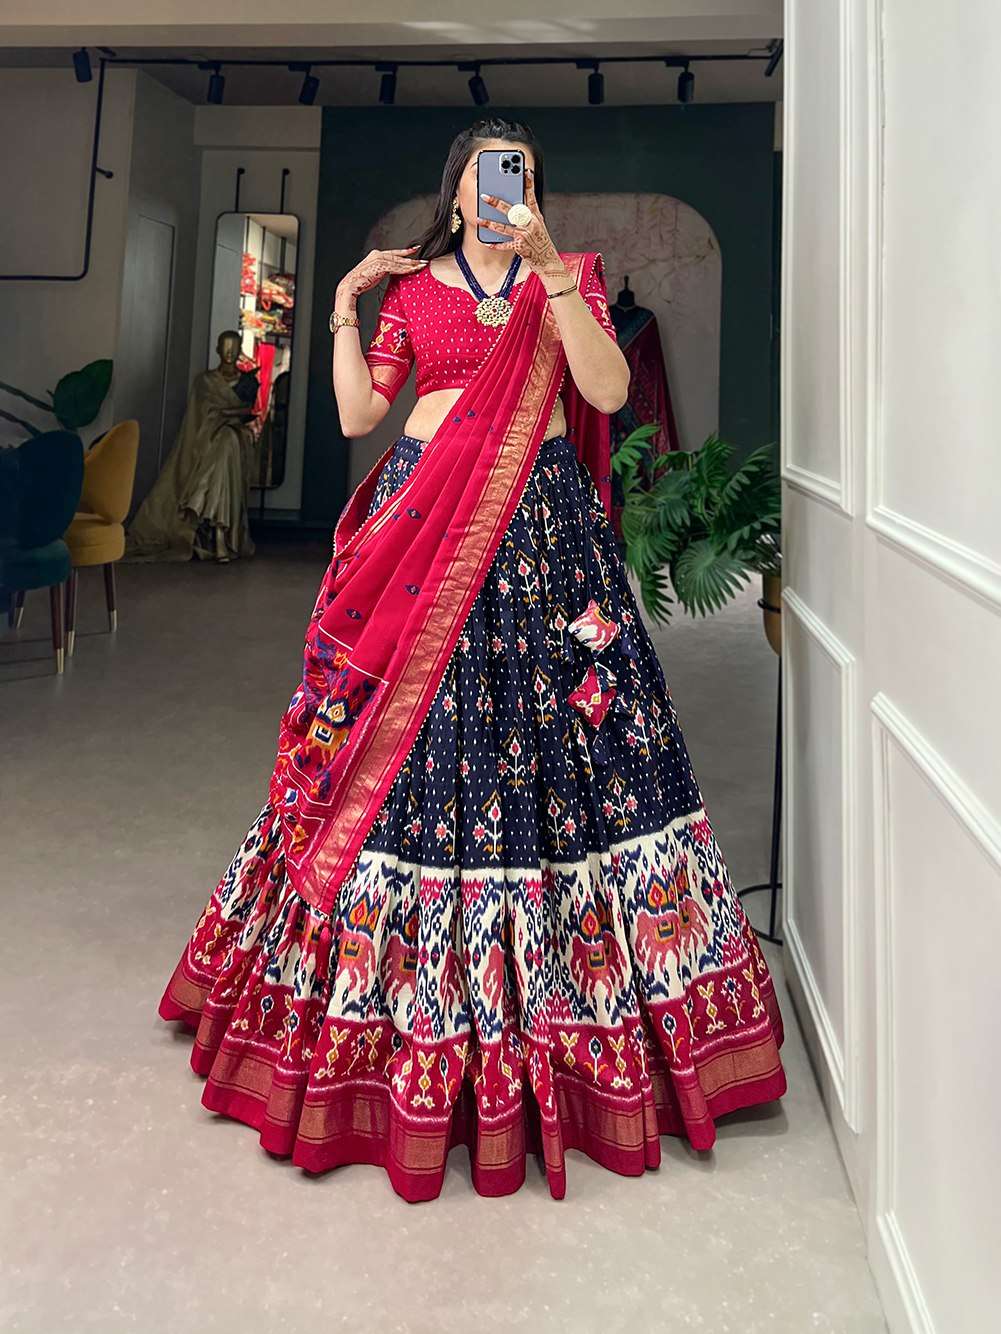 Lehenga showcase your style and homage to the cultural tradi...